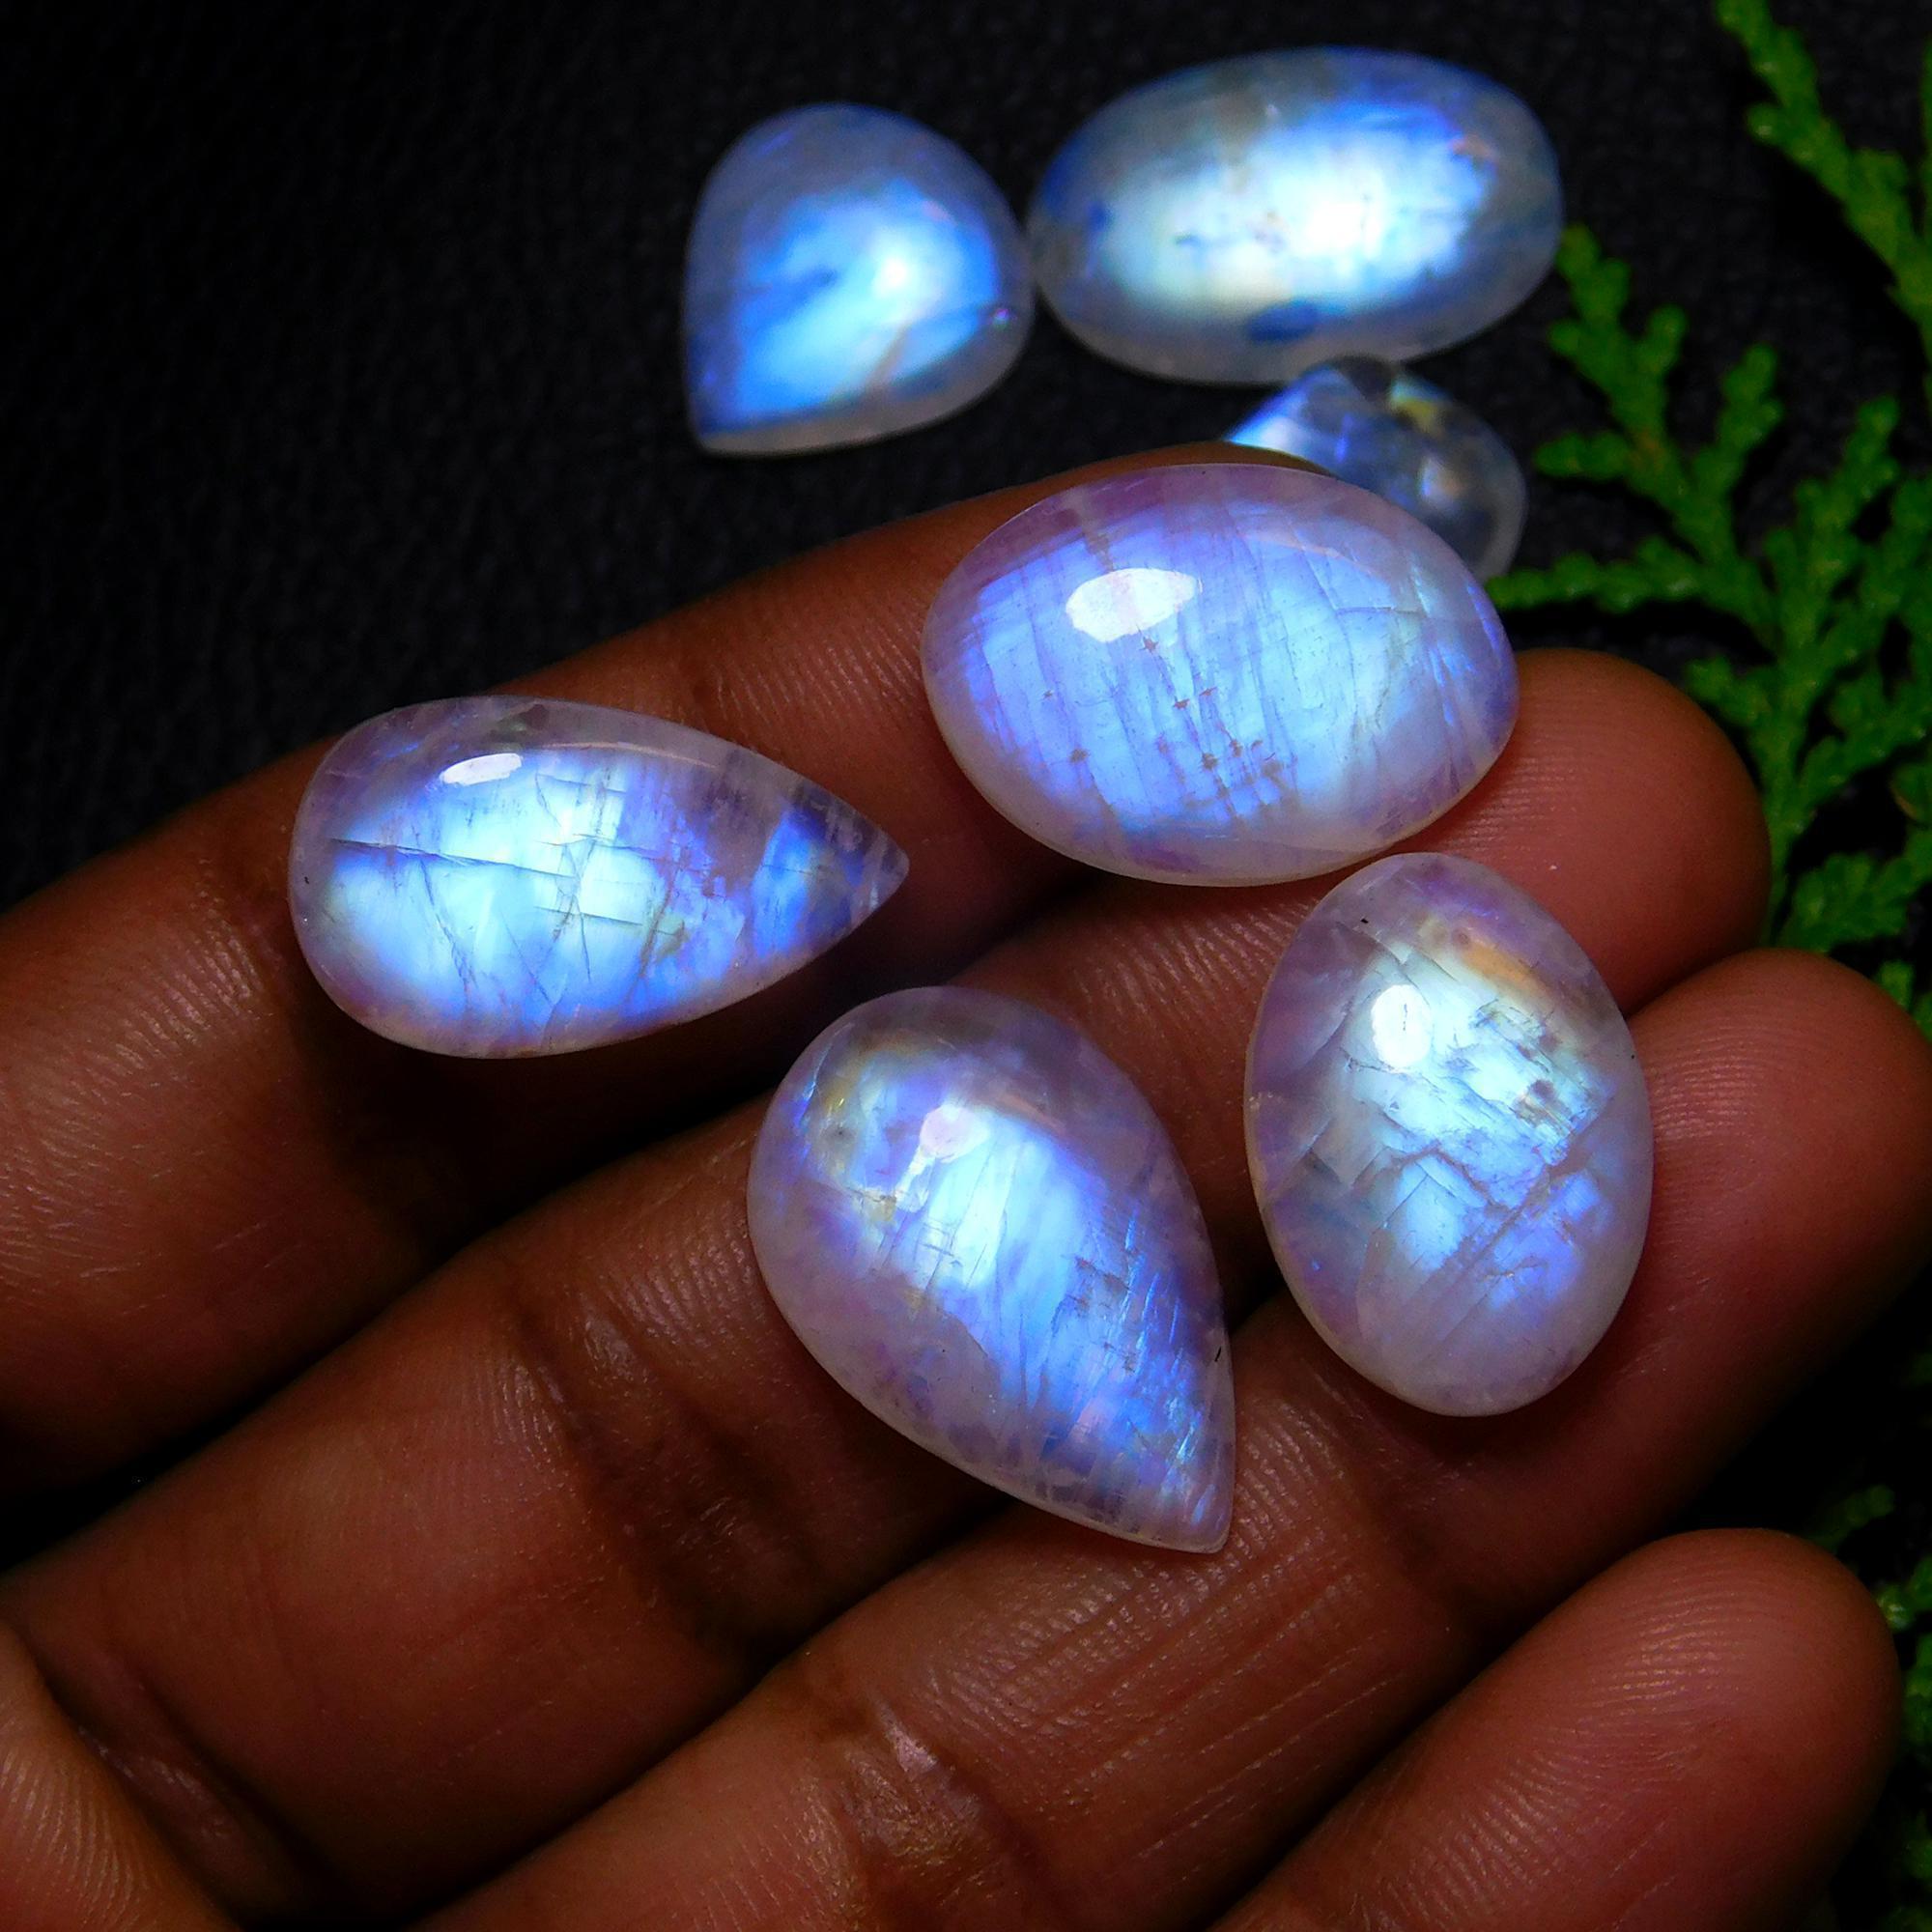 9Pcs 98Cts Natural Rainbow Moonstone Cabochon Blue Fire Loose Gemstone Crystal jewelry supplies wholesale lot gift for her Black Friday  22X14 15X12mm#9432